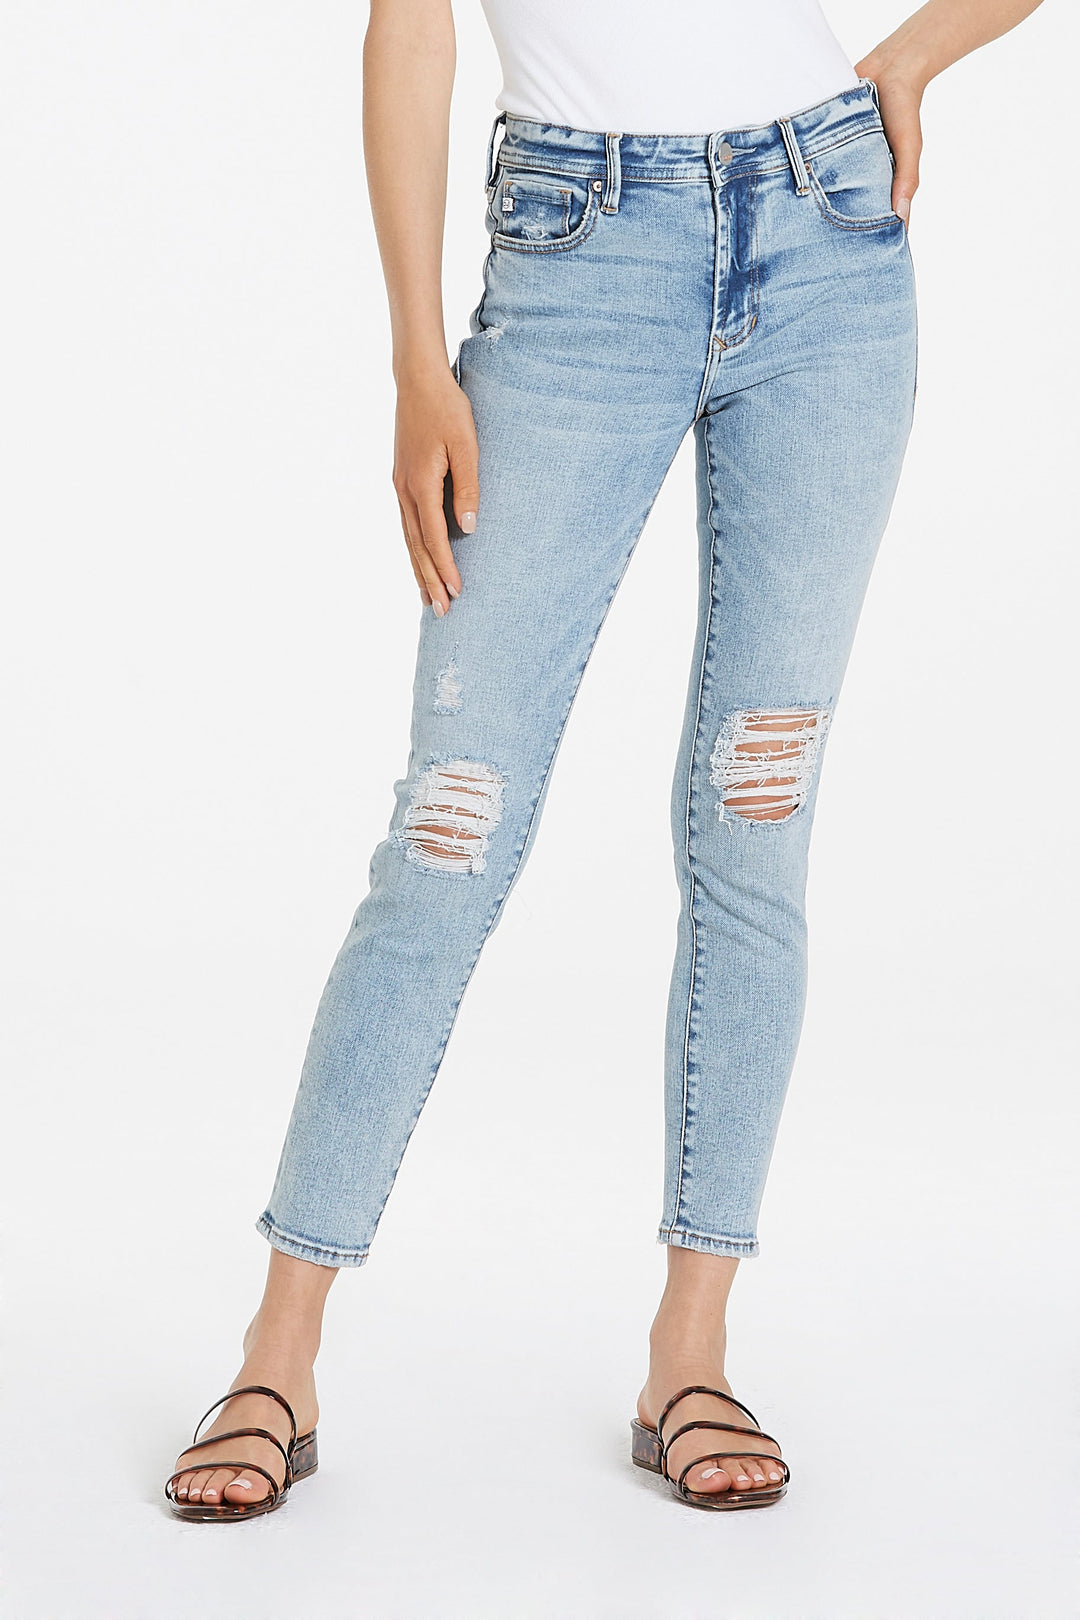 image of a female model wearing a GISELE HIGH RISE ANKLE SKINNY ATLANTIC COAST JEANS JEANS